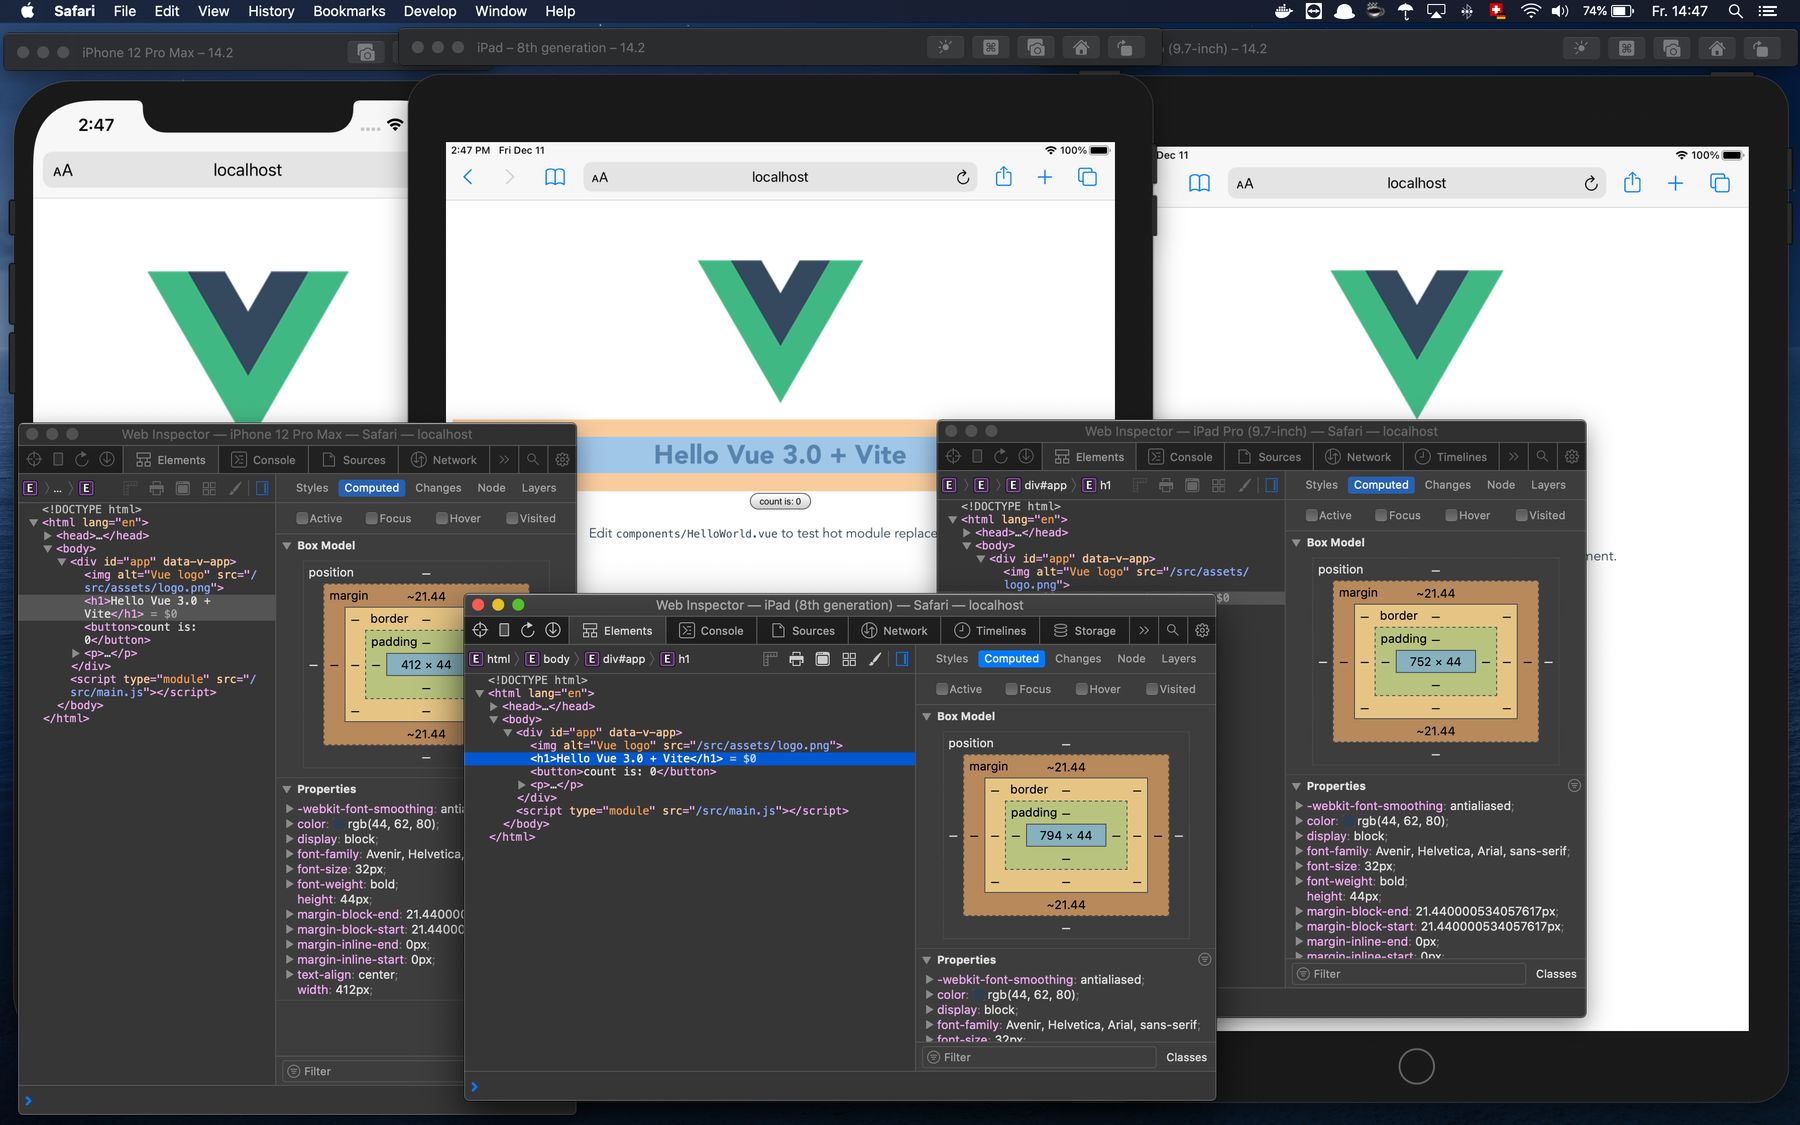 Open the Simulator tool in Xcode